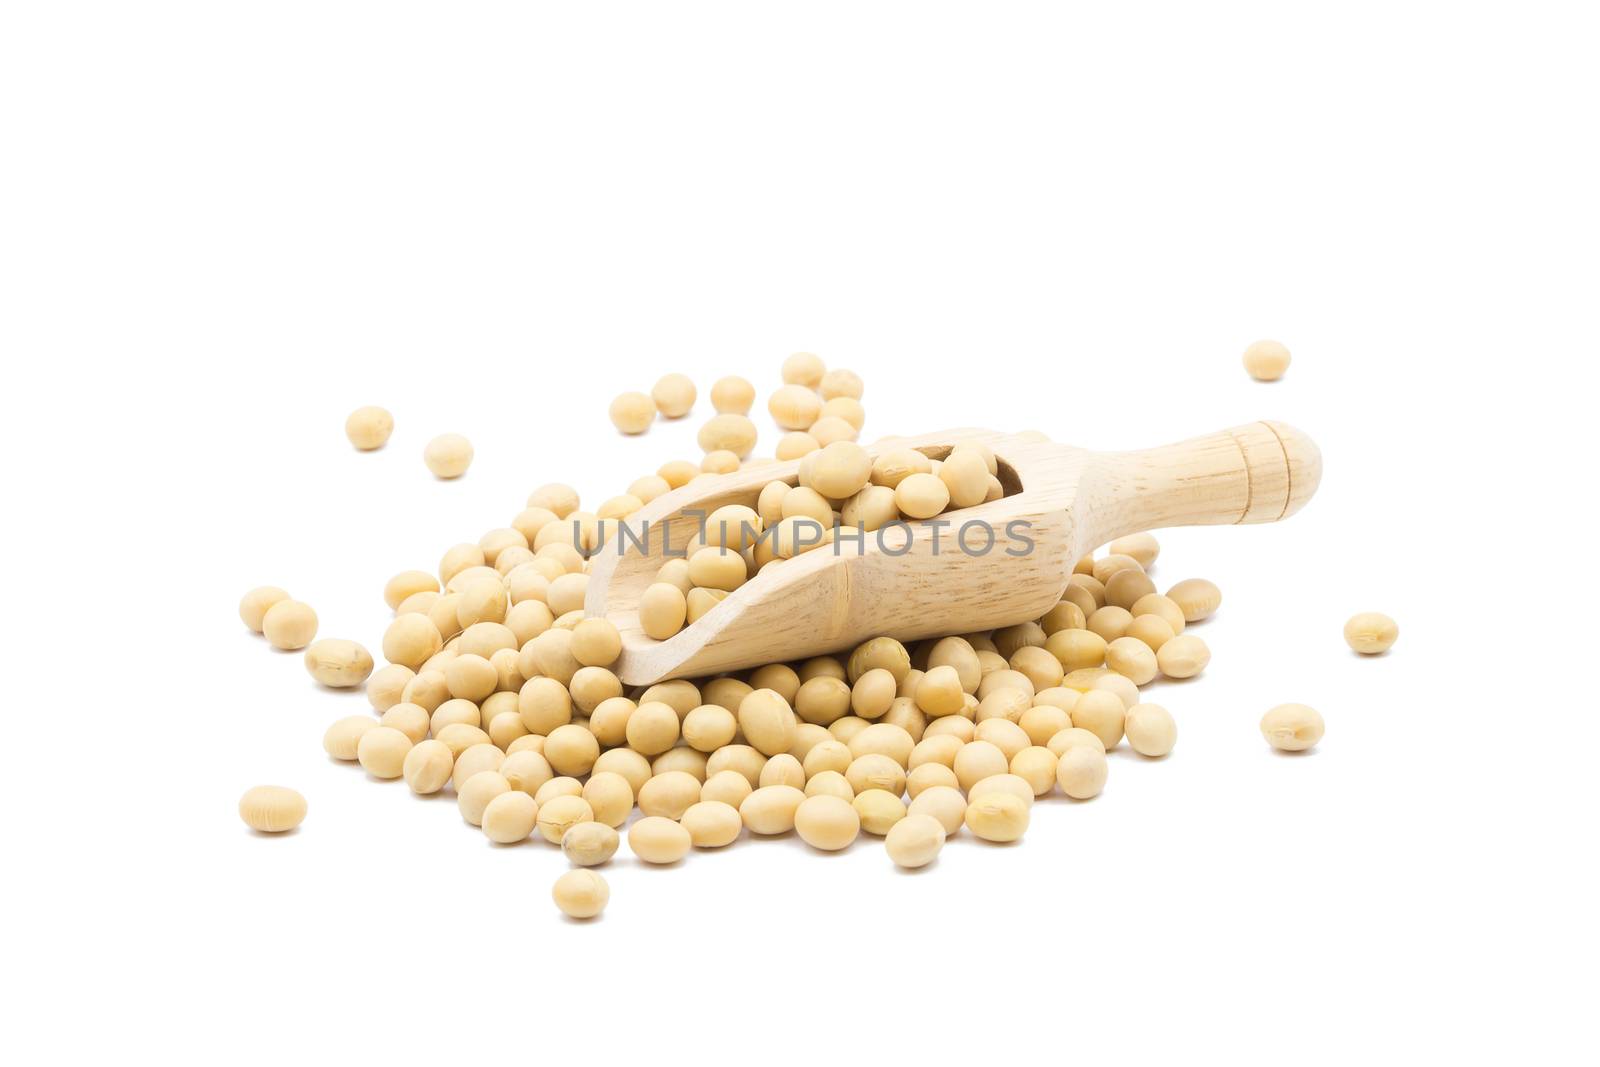 Soybean and Soybean in wooden scoop isolated on white background.